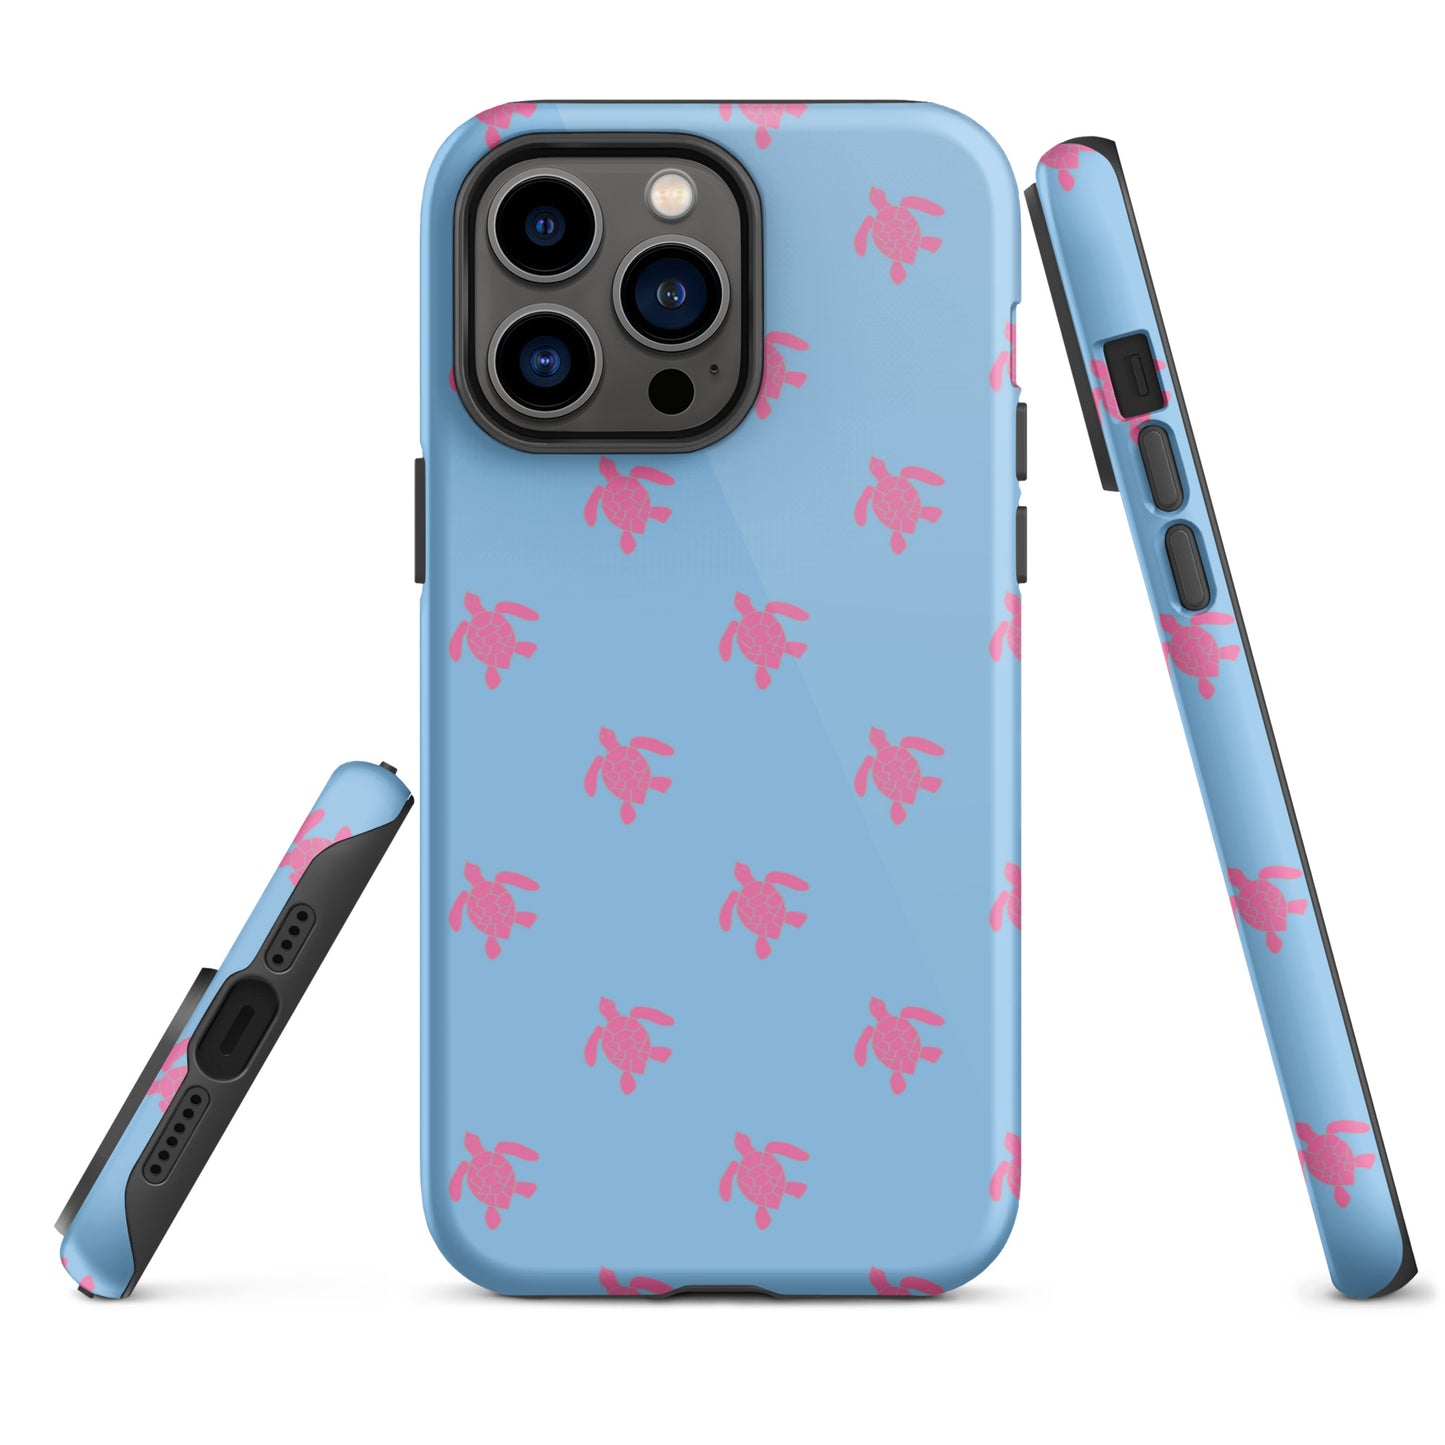 Turtle iPhone Case - Pink on Lt. Blue